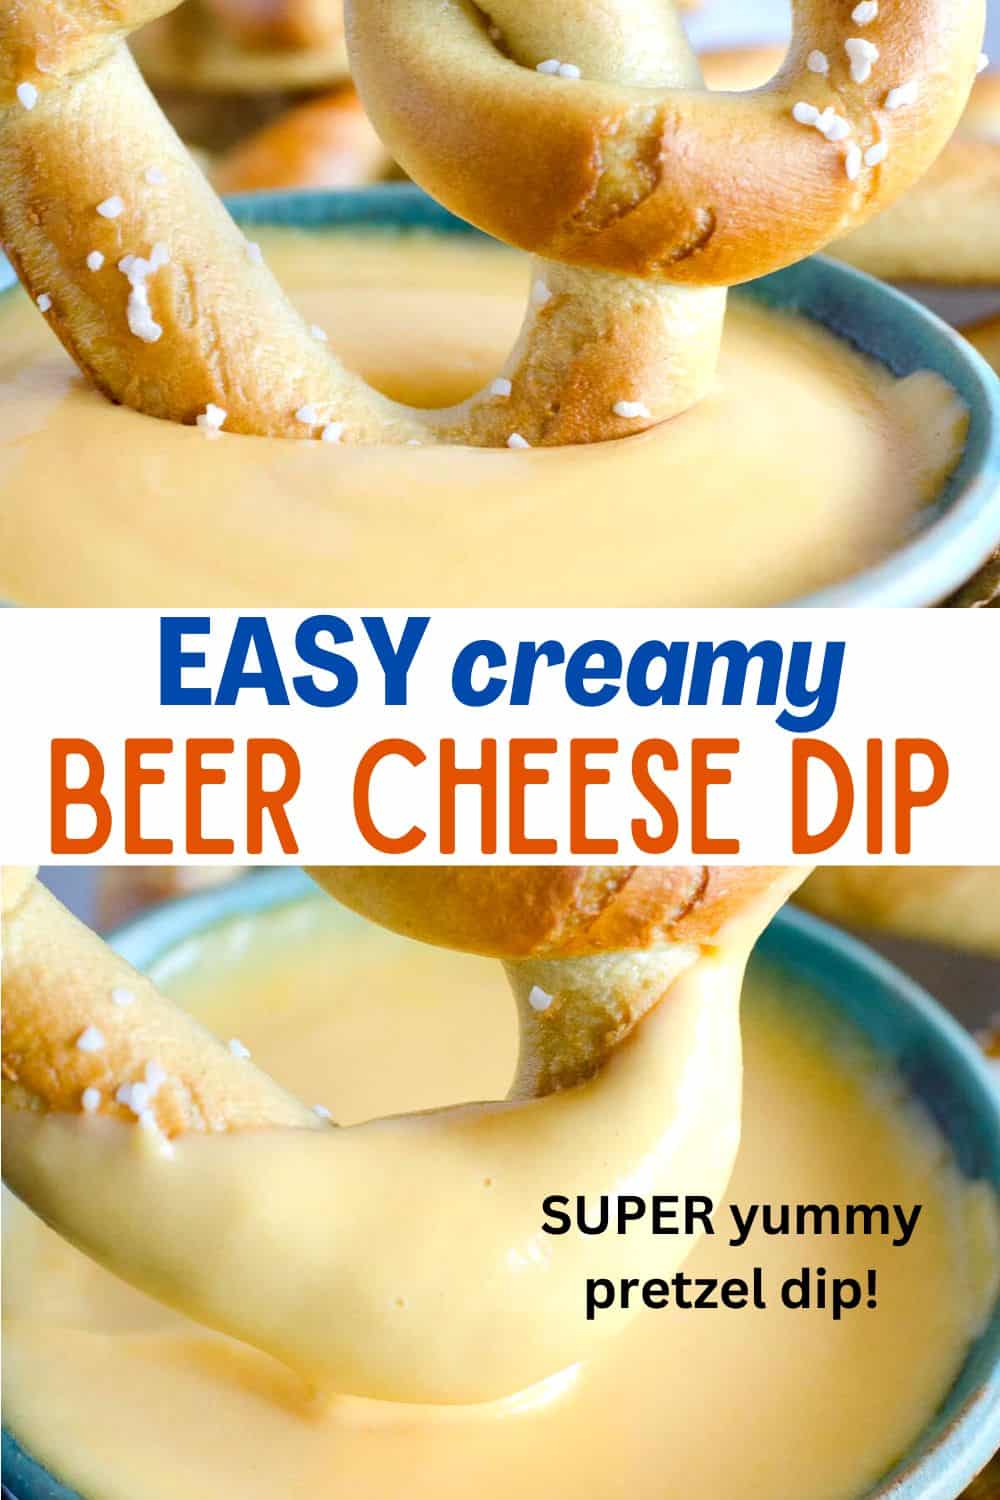 This beer cheese is the best dip for your pretzels or as a cheese fondue.  You can serve it hot or cold and use on burgers and sandwiches or slathered on your favorite bread!